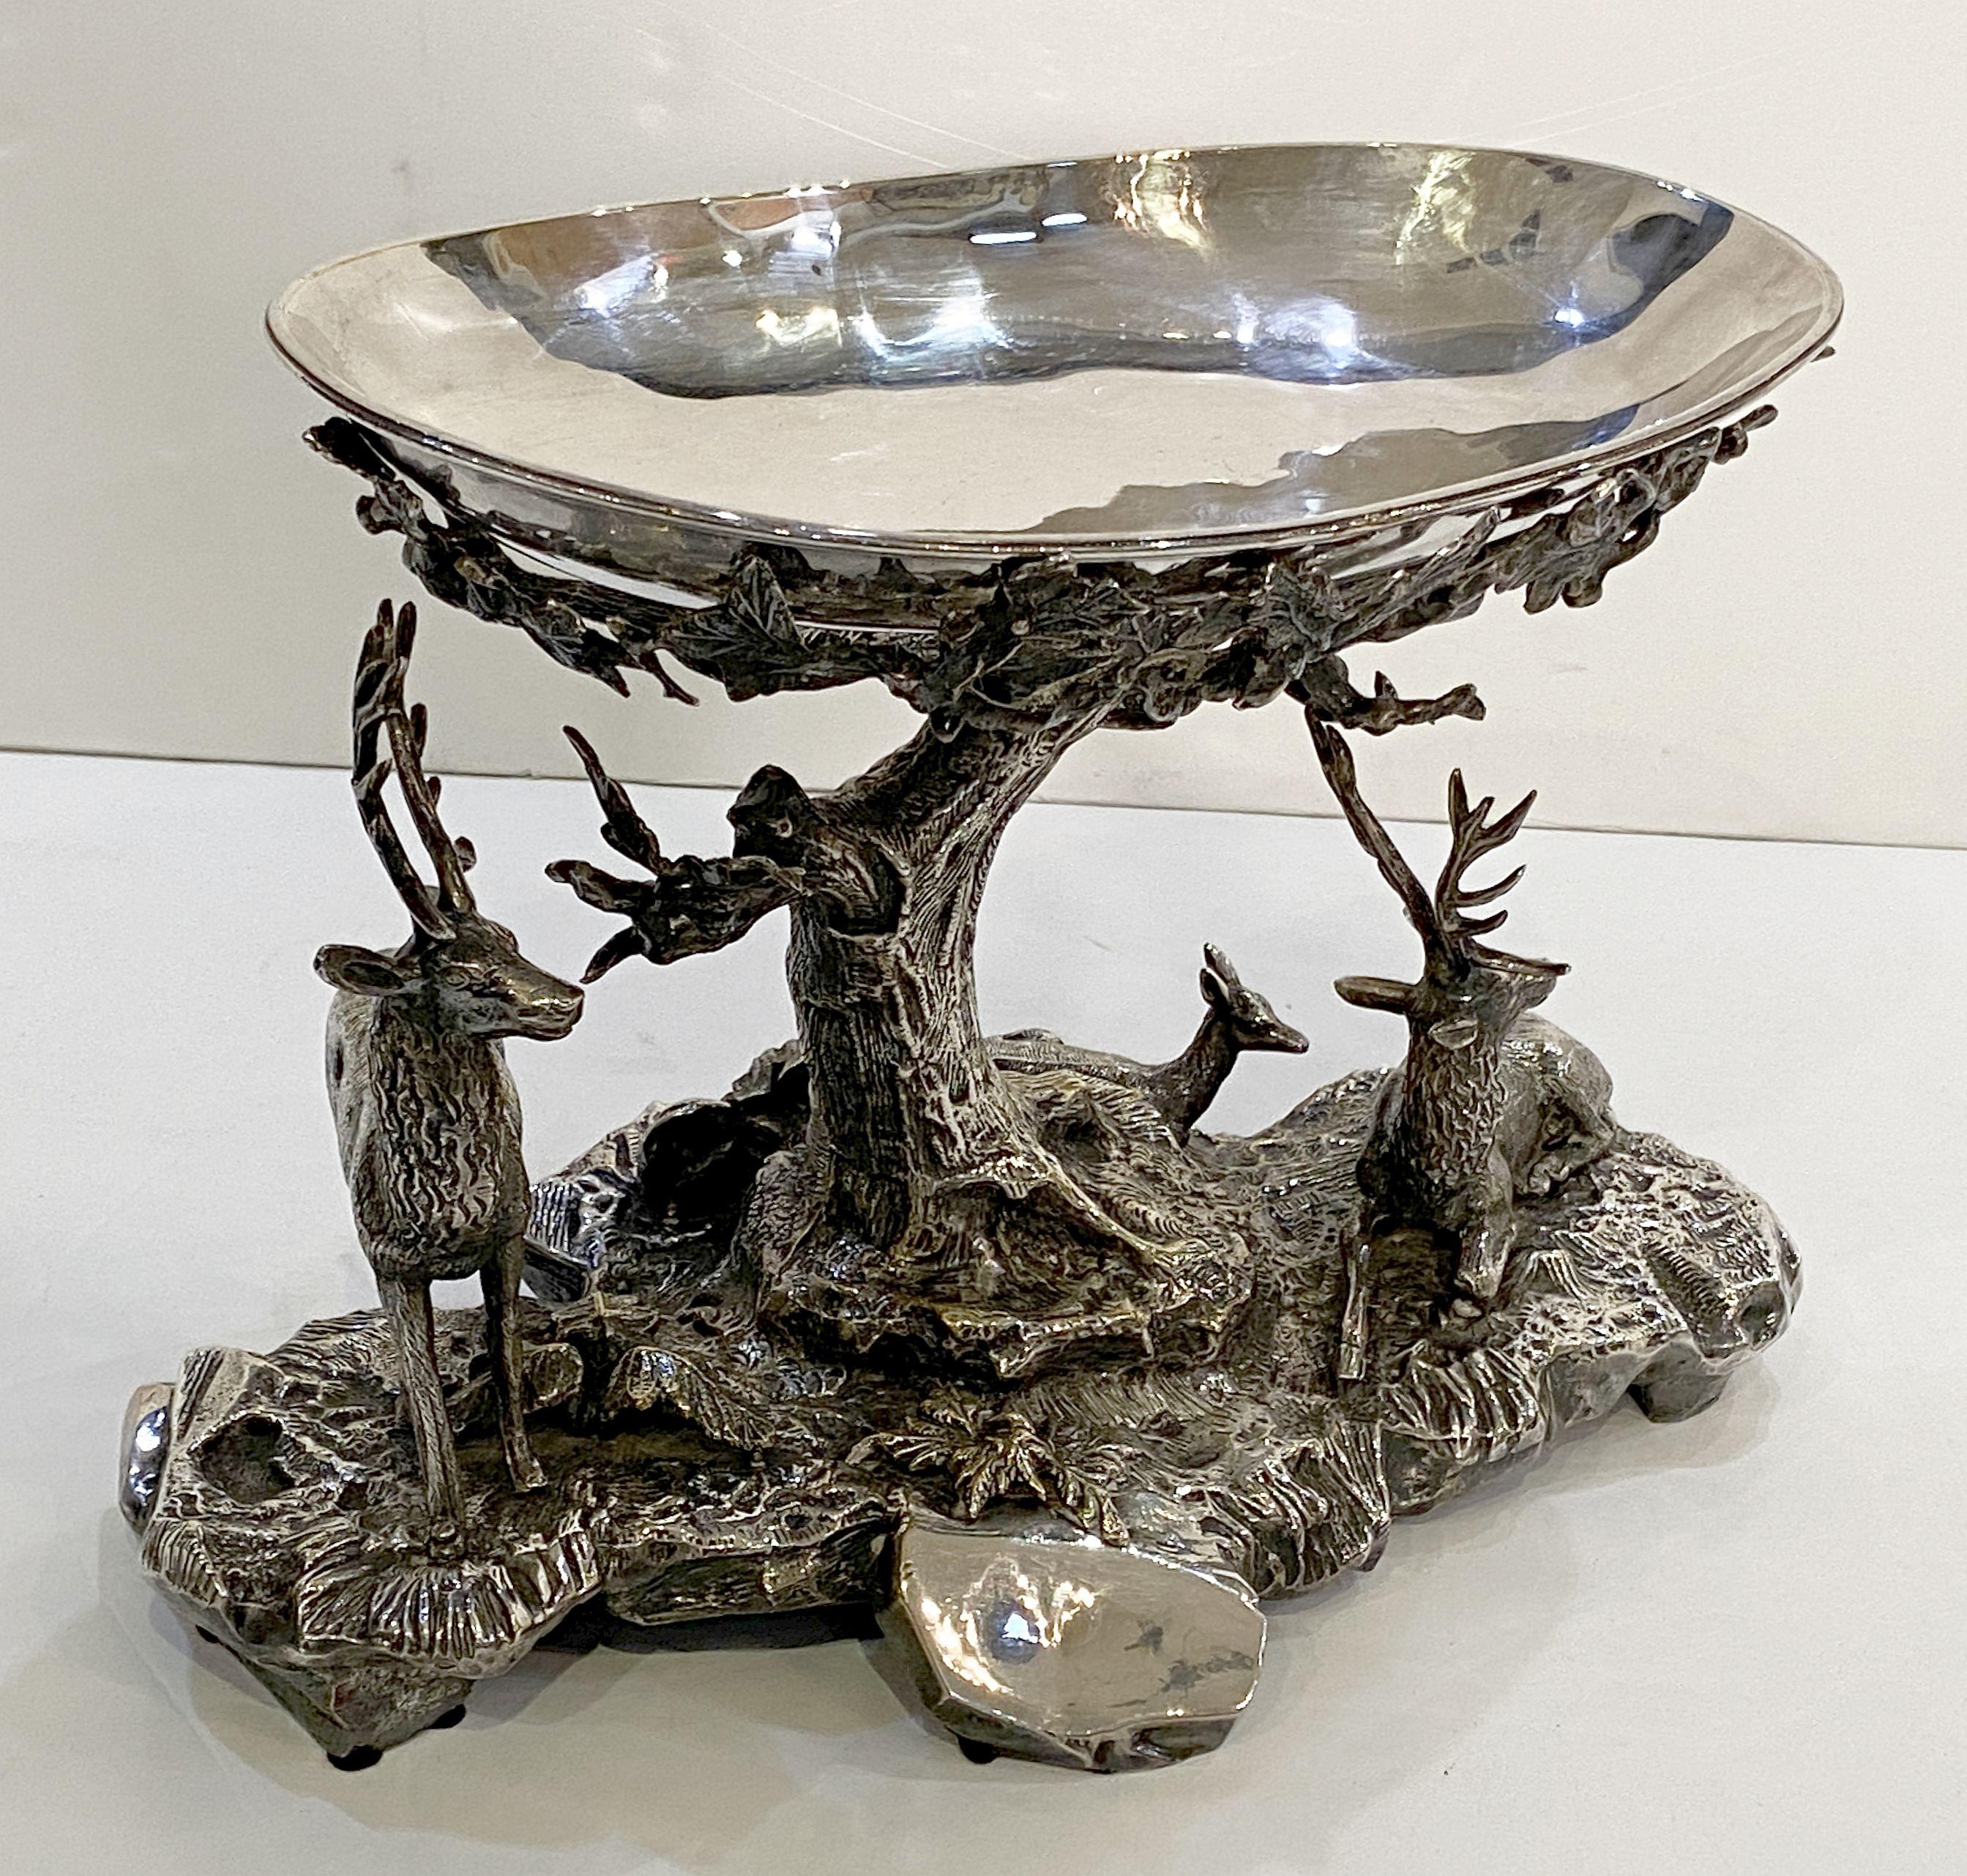 Large Valenti Stag or Deer Sculptural Centerpiece of Silver Plated Bronze  4